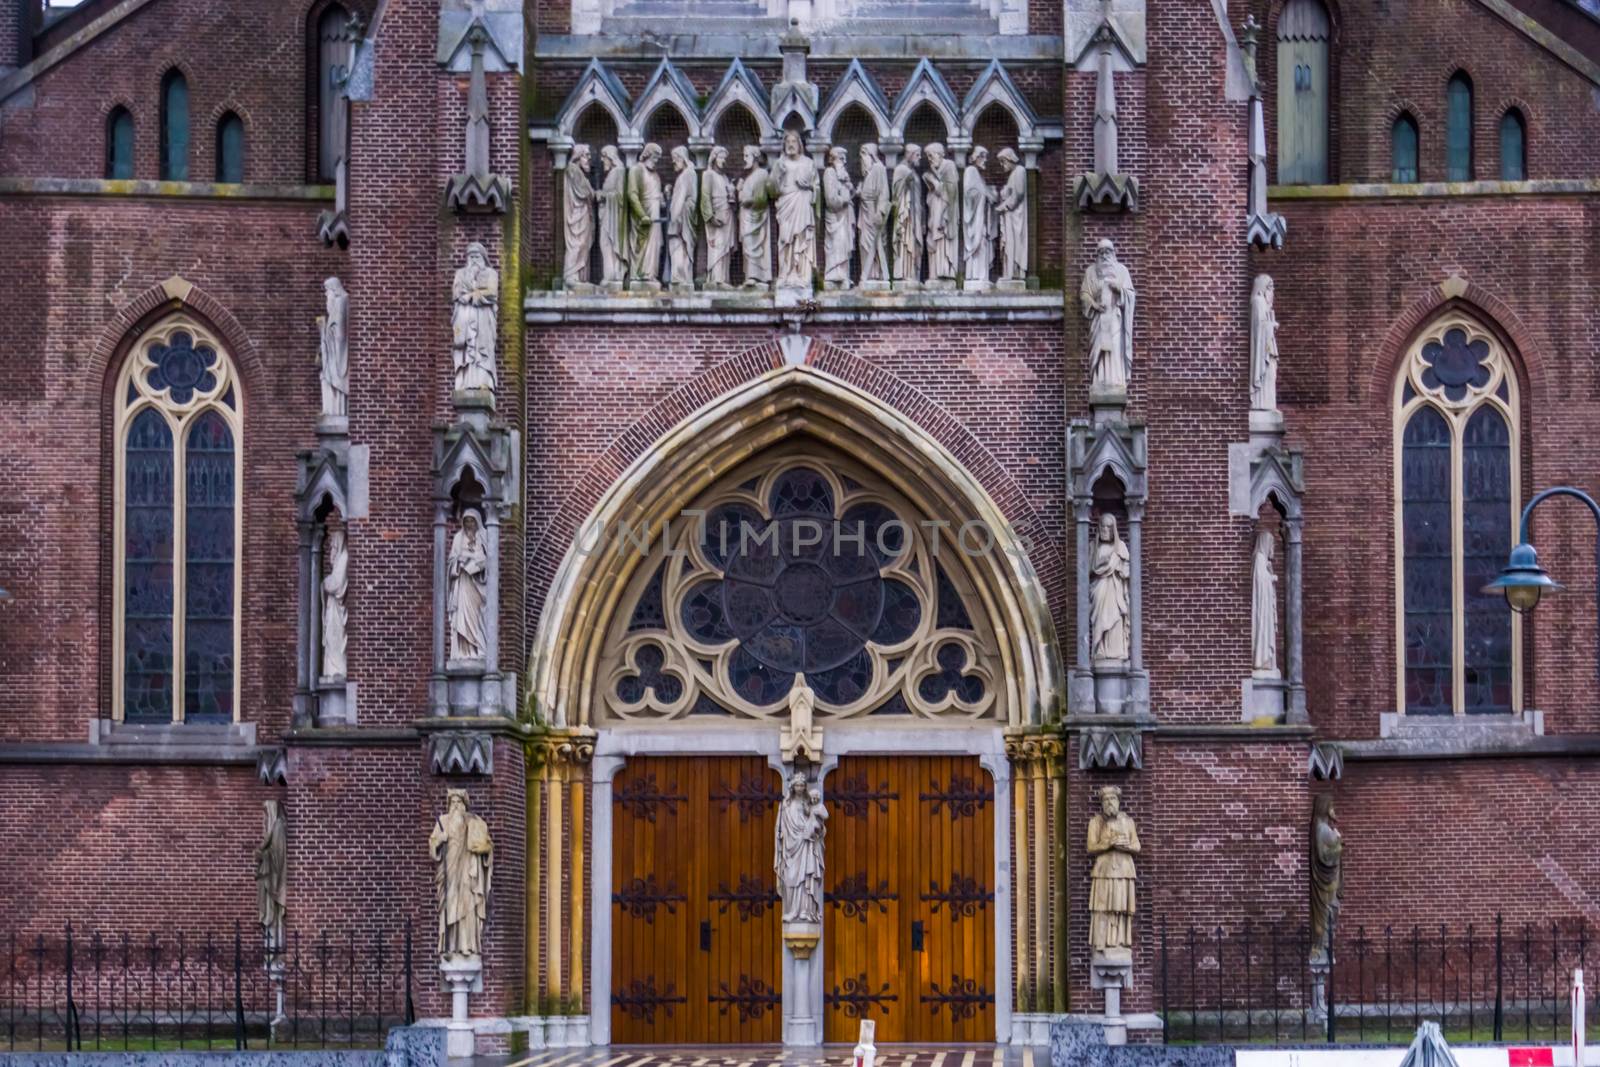 the entrance of the Saint Lambertus church in Veghel city, The Netherlands, popular medieval architecture by pierre cuypers by charlottebleijenberg